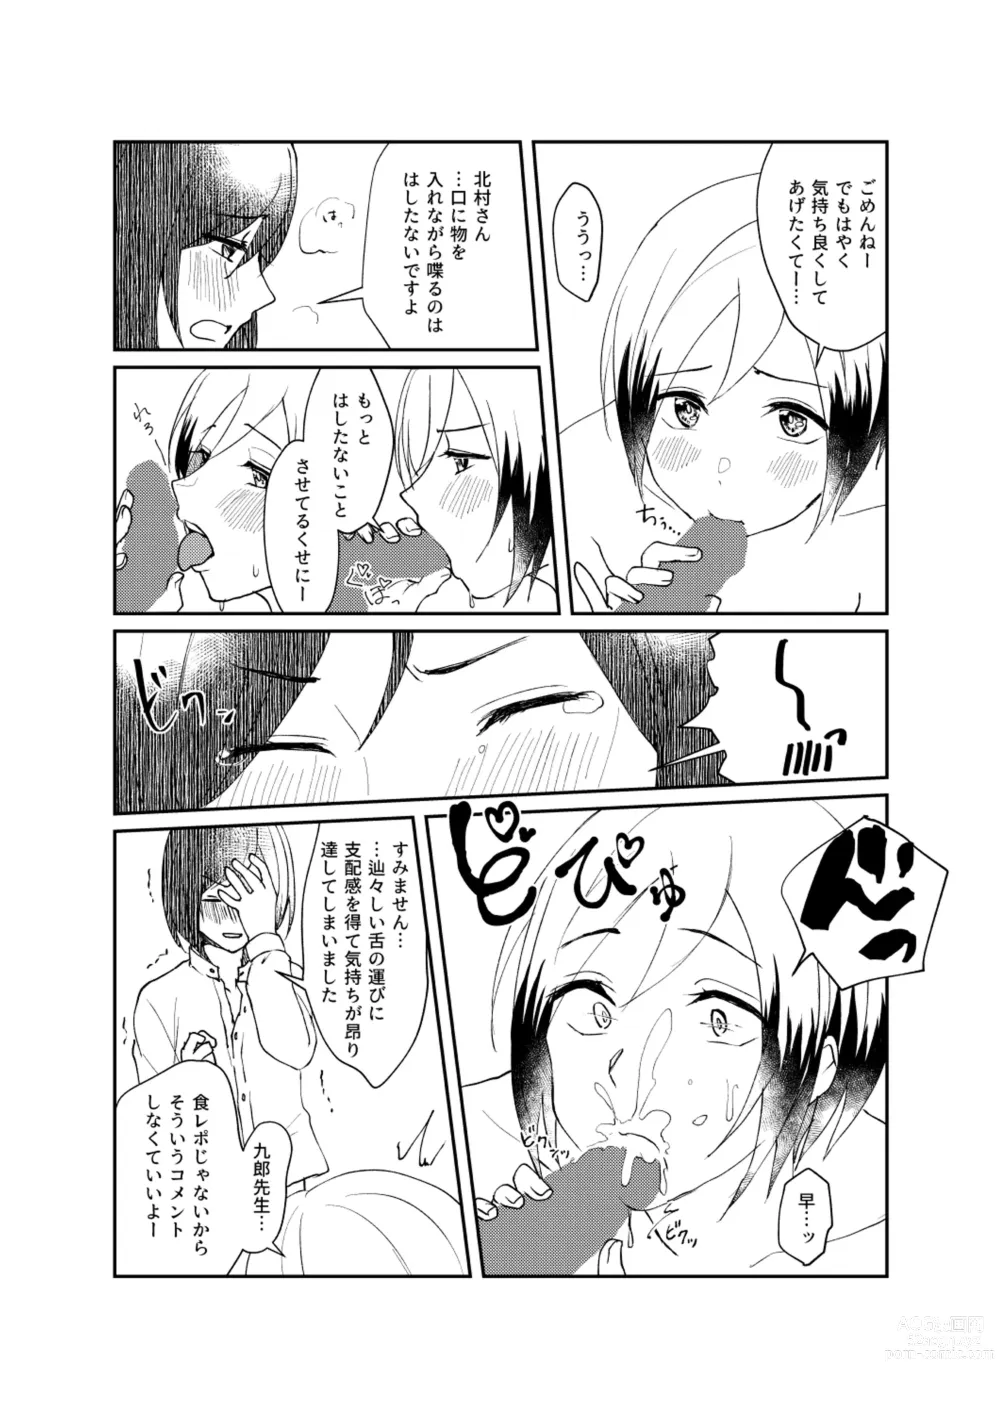 Page 10 of doujinshi 他人のそら似